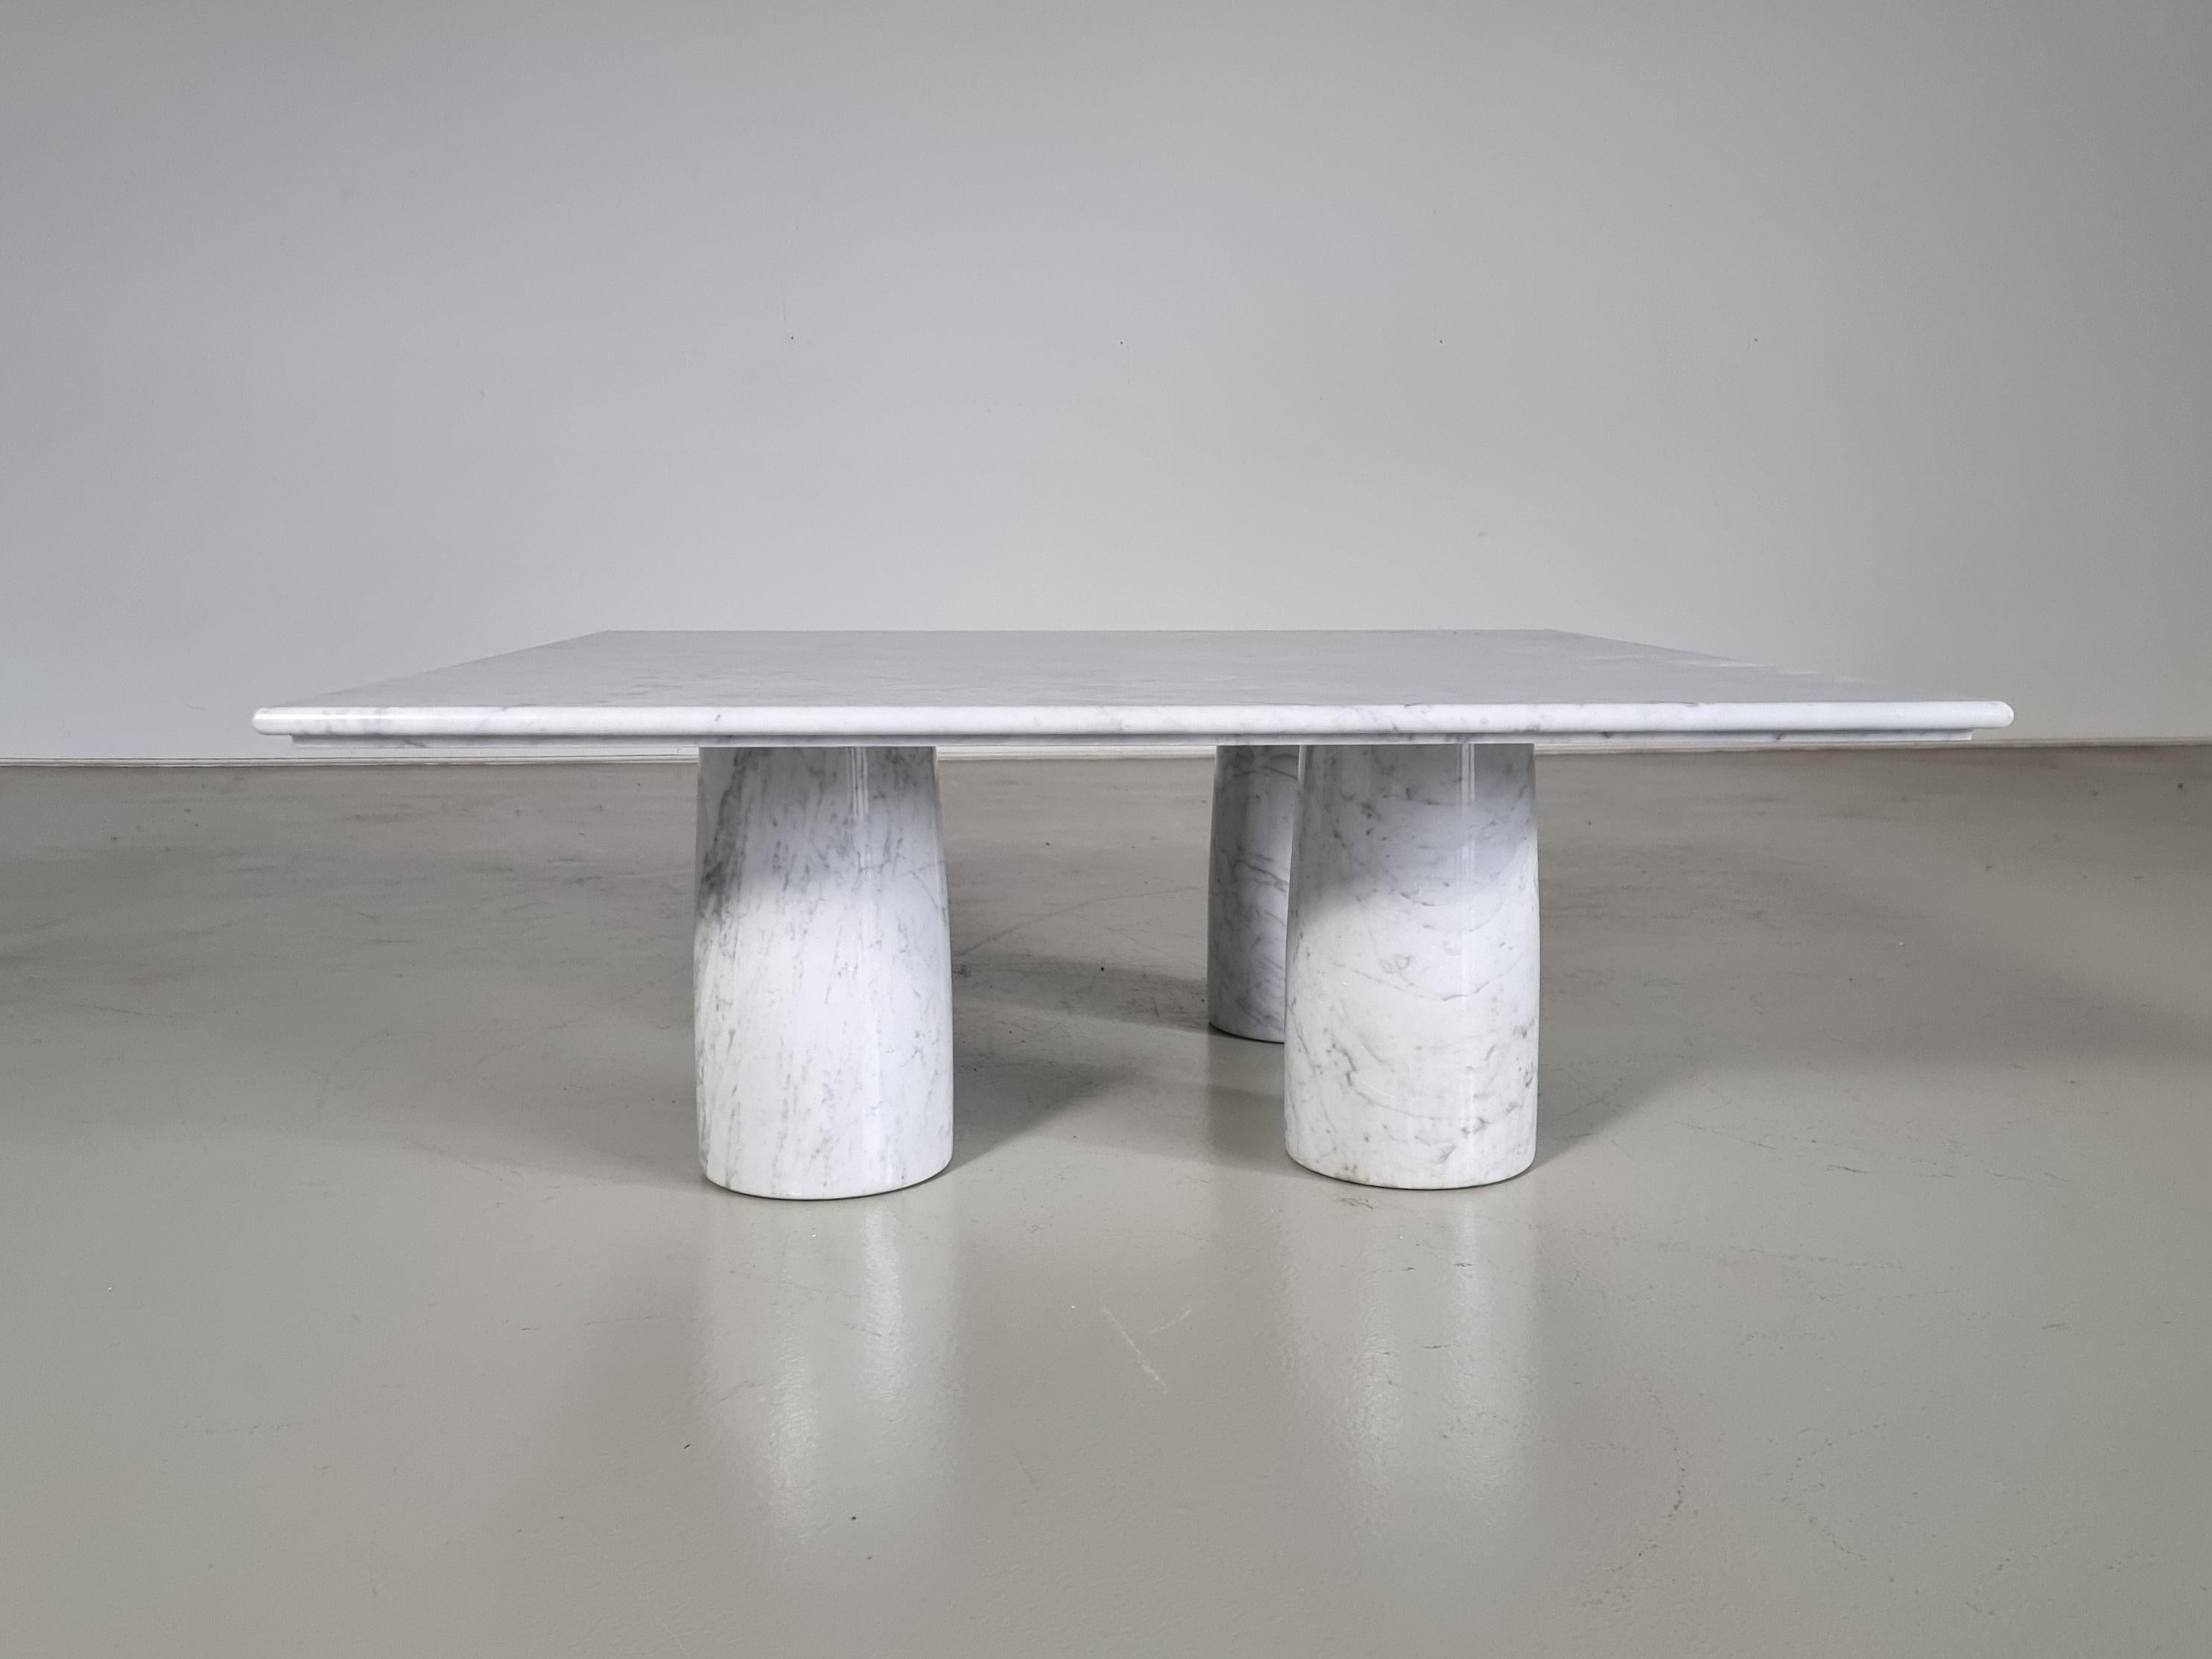 'Il Colonnato' coffee table in Carrara marble by Mario Bellini for Cassina. 

The table features a thick square white marble top with distinct gray veining. There are four thick column legs that support the tabletop and can be placed in different